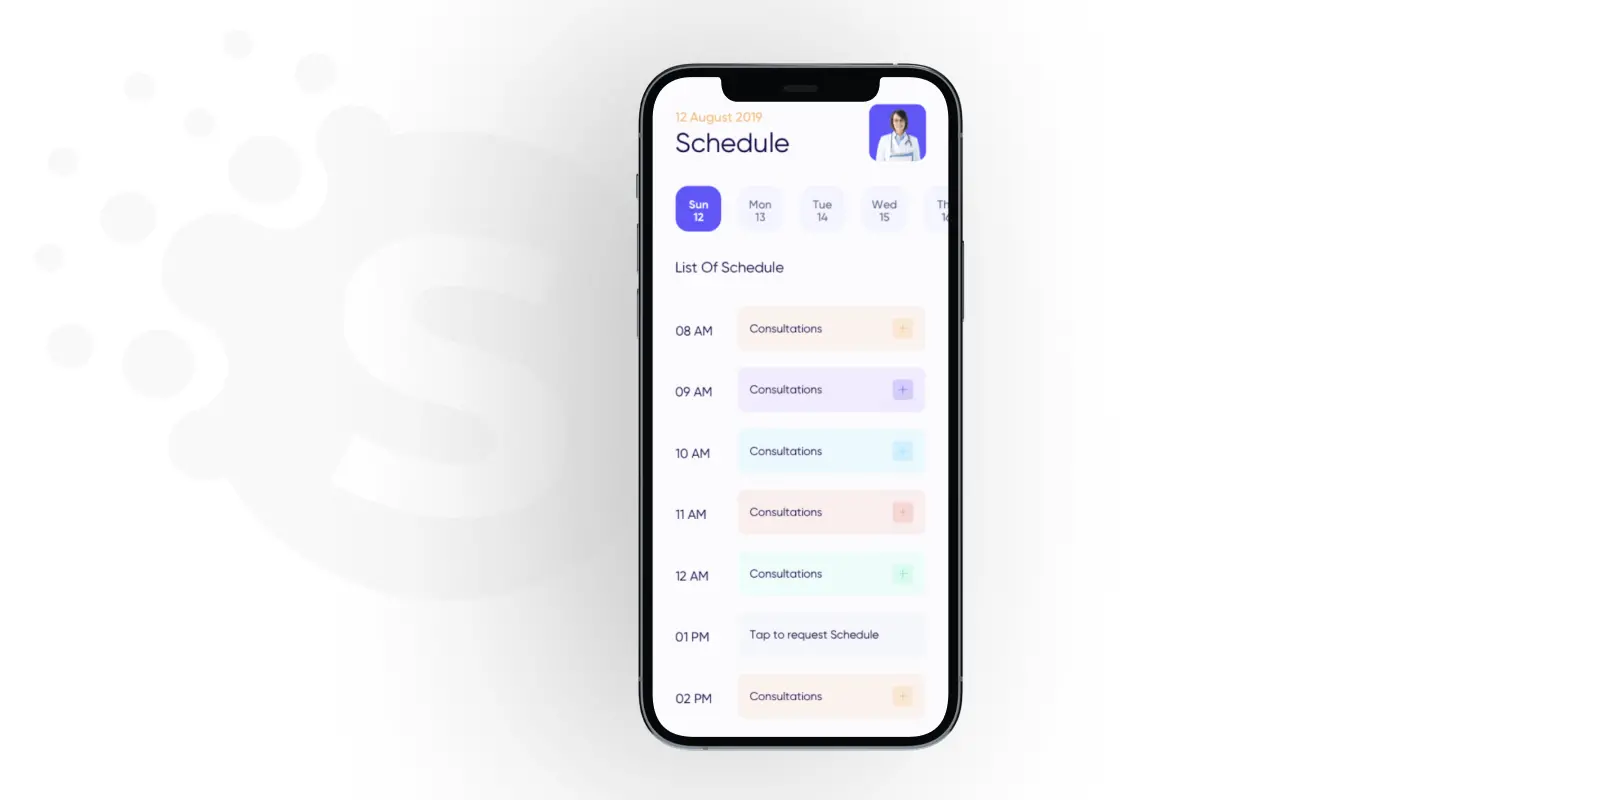 Cost of doctor appointment booking medical mobile app September 2020